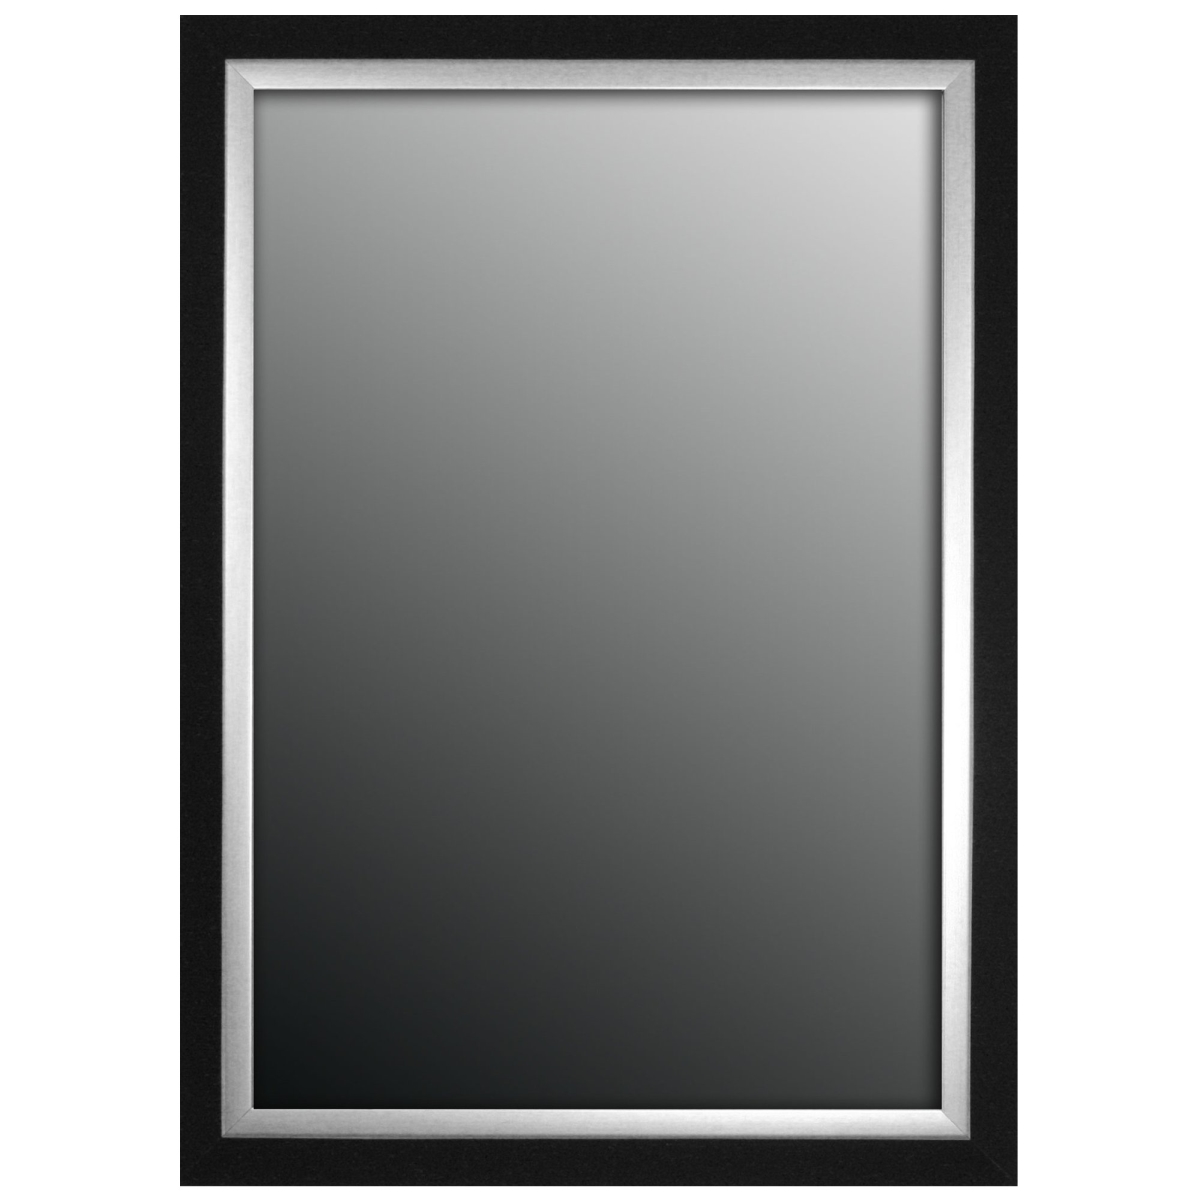 Hitchcock Butterfield 8075000 Black & Brushed Nickel Silver Montevideo Natural Wall Mirror - 16.75 X 34.75 In.